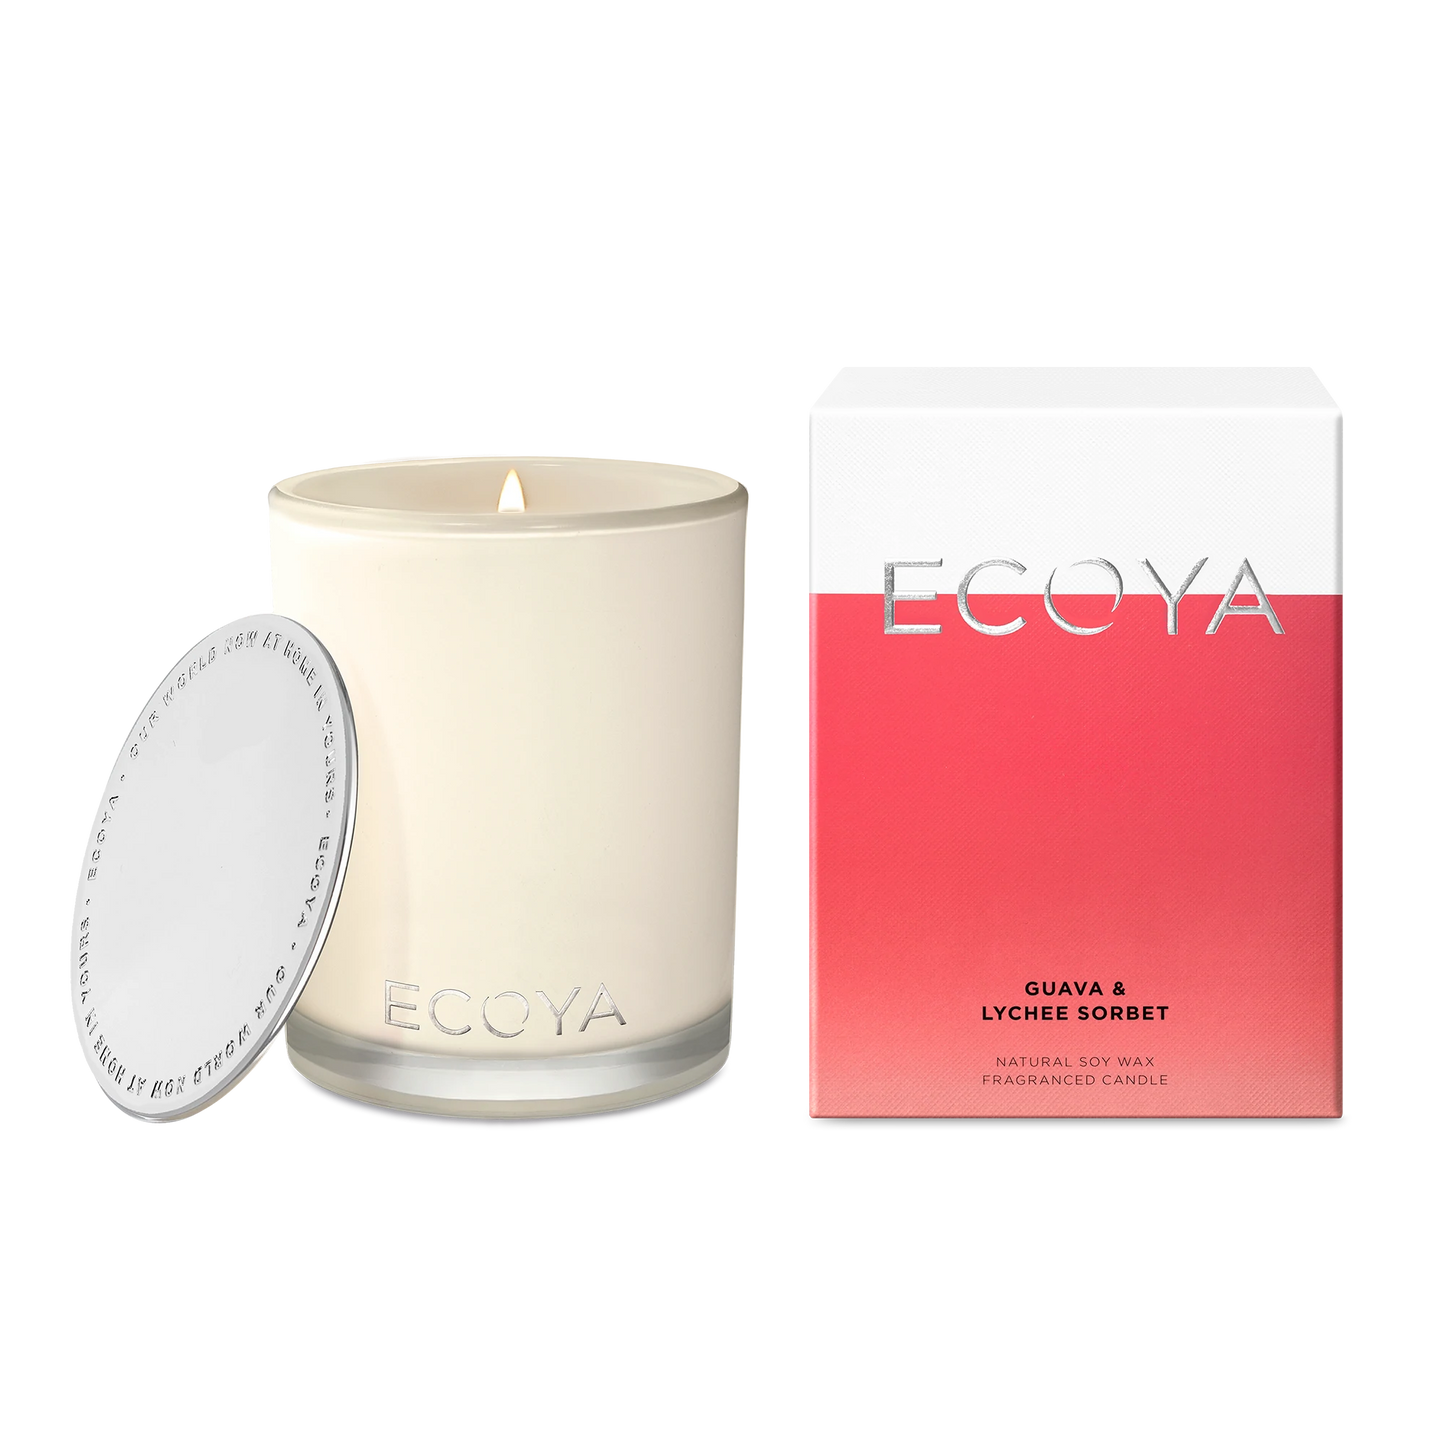 Ecoya Candle 'Guava & Lychee Sorbet' 80 Hr